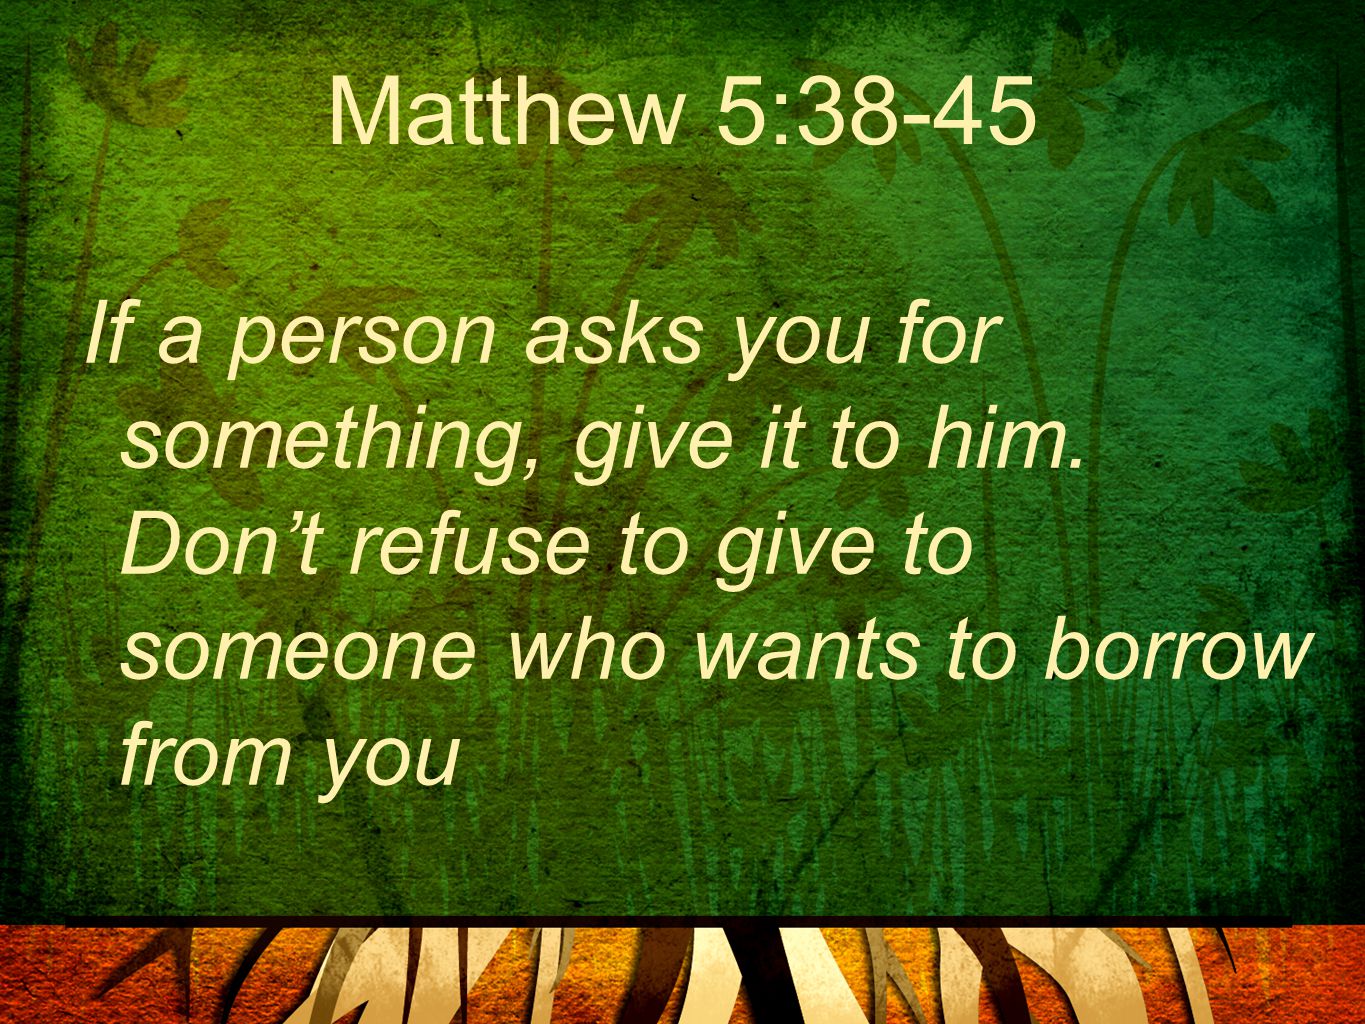 Matthew 5:38-45 If a person asks you for something, give it to him.